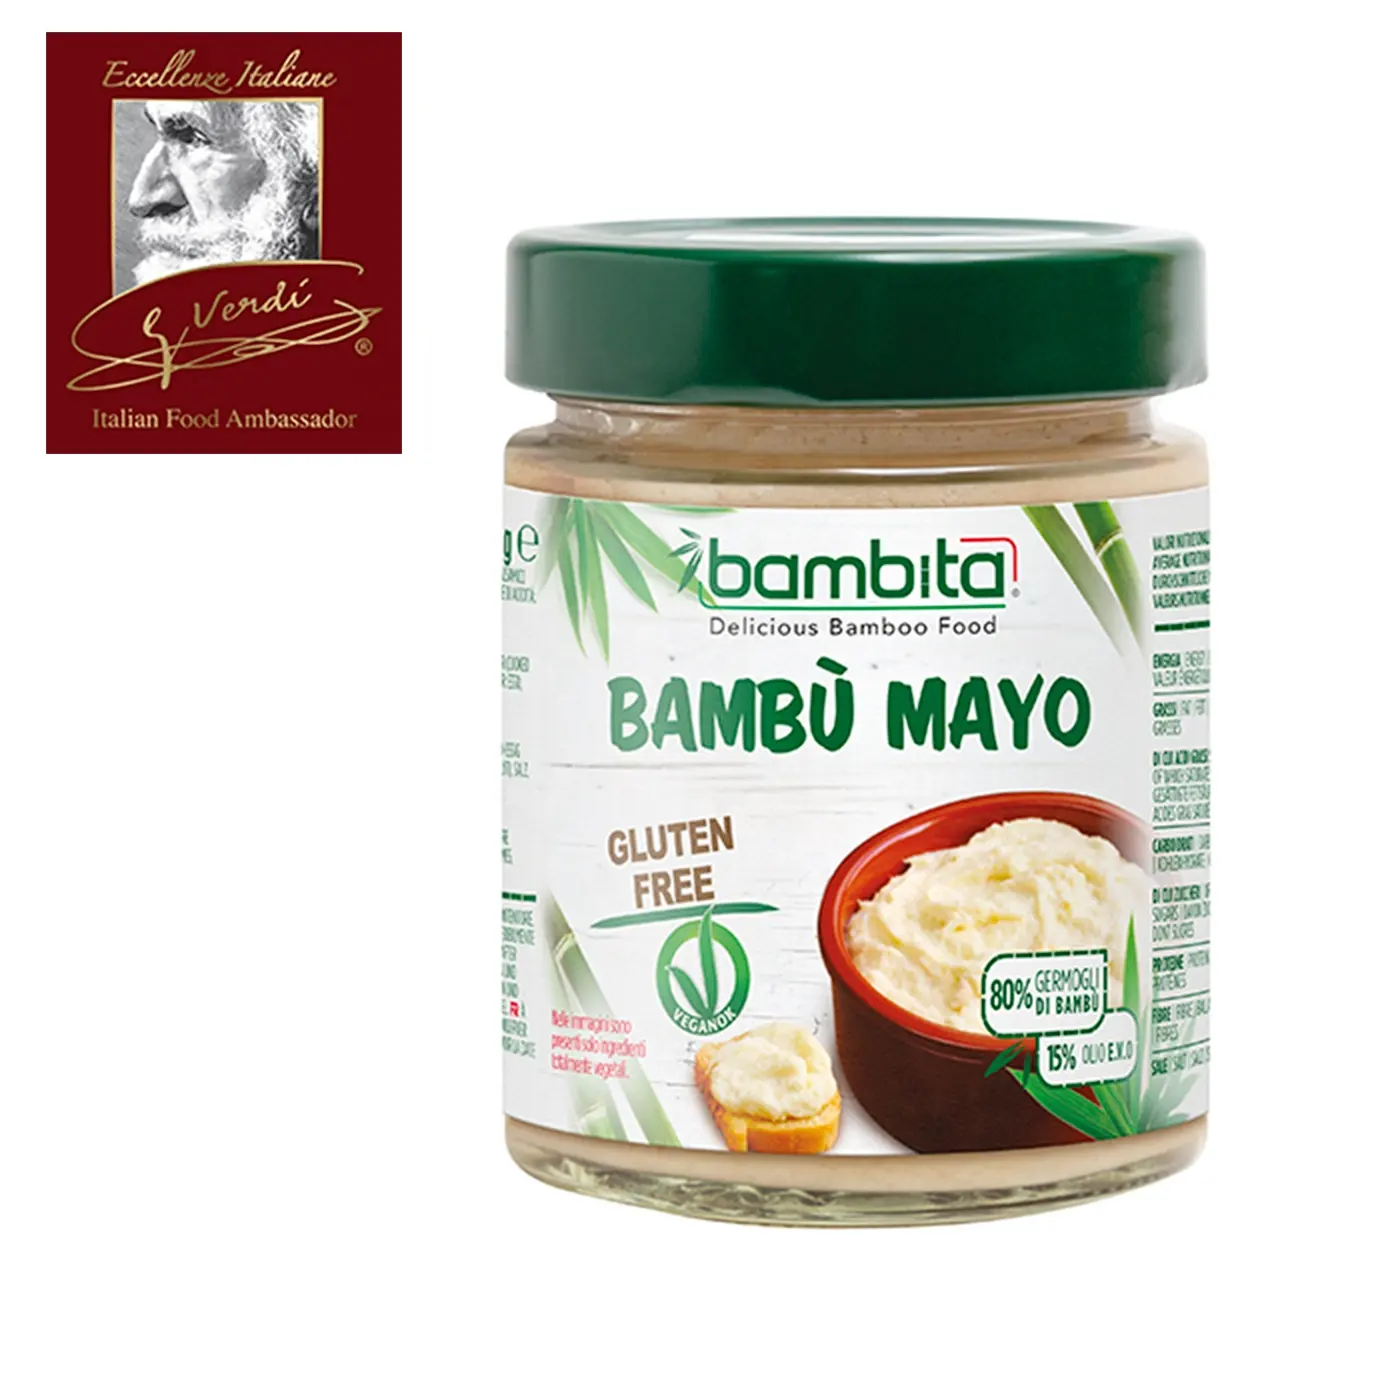 190 g Bamboo Mayo Spread canned vegetable Best Price Giuseppe Verdi Selection Sauce Made in Italy